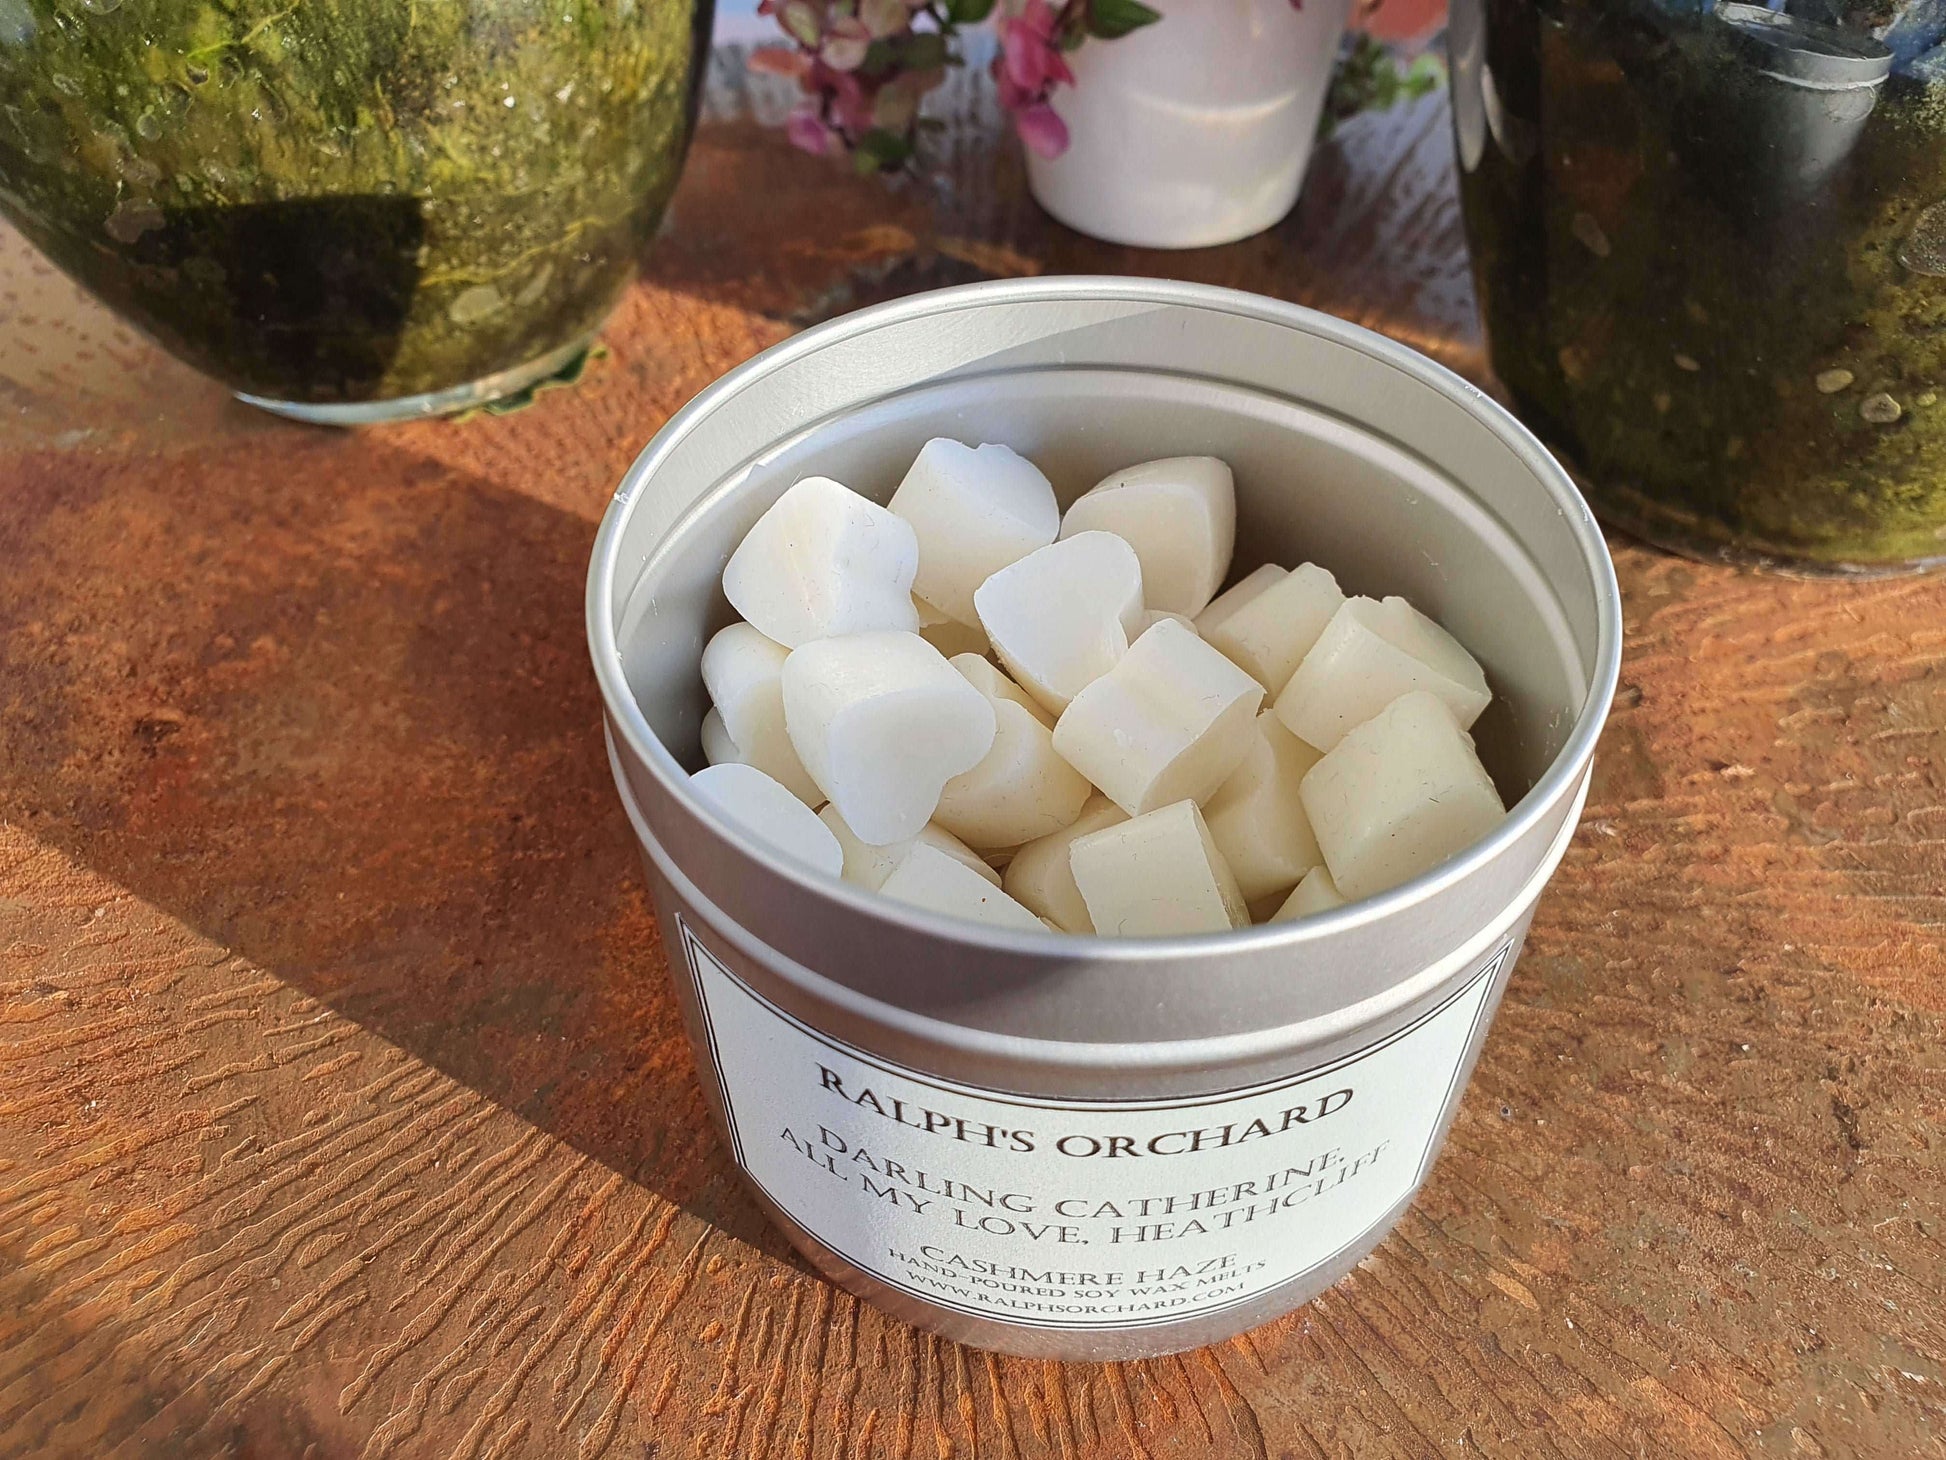 Heart shaped wax melts with personalised label Candles Ralph's Orchard 